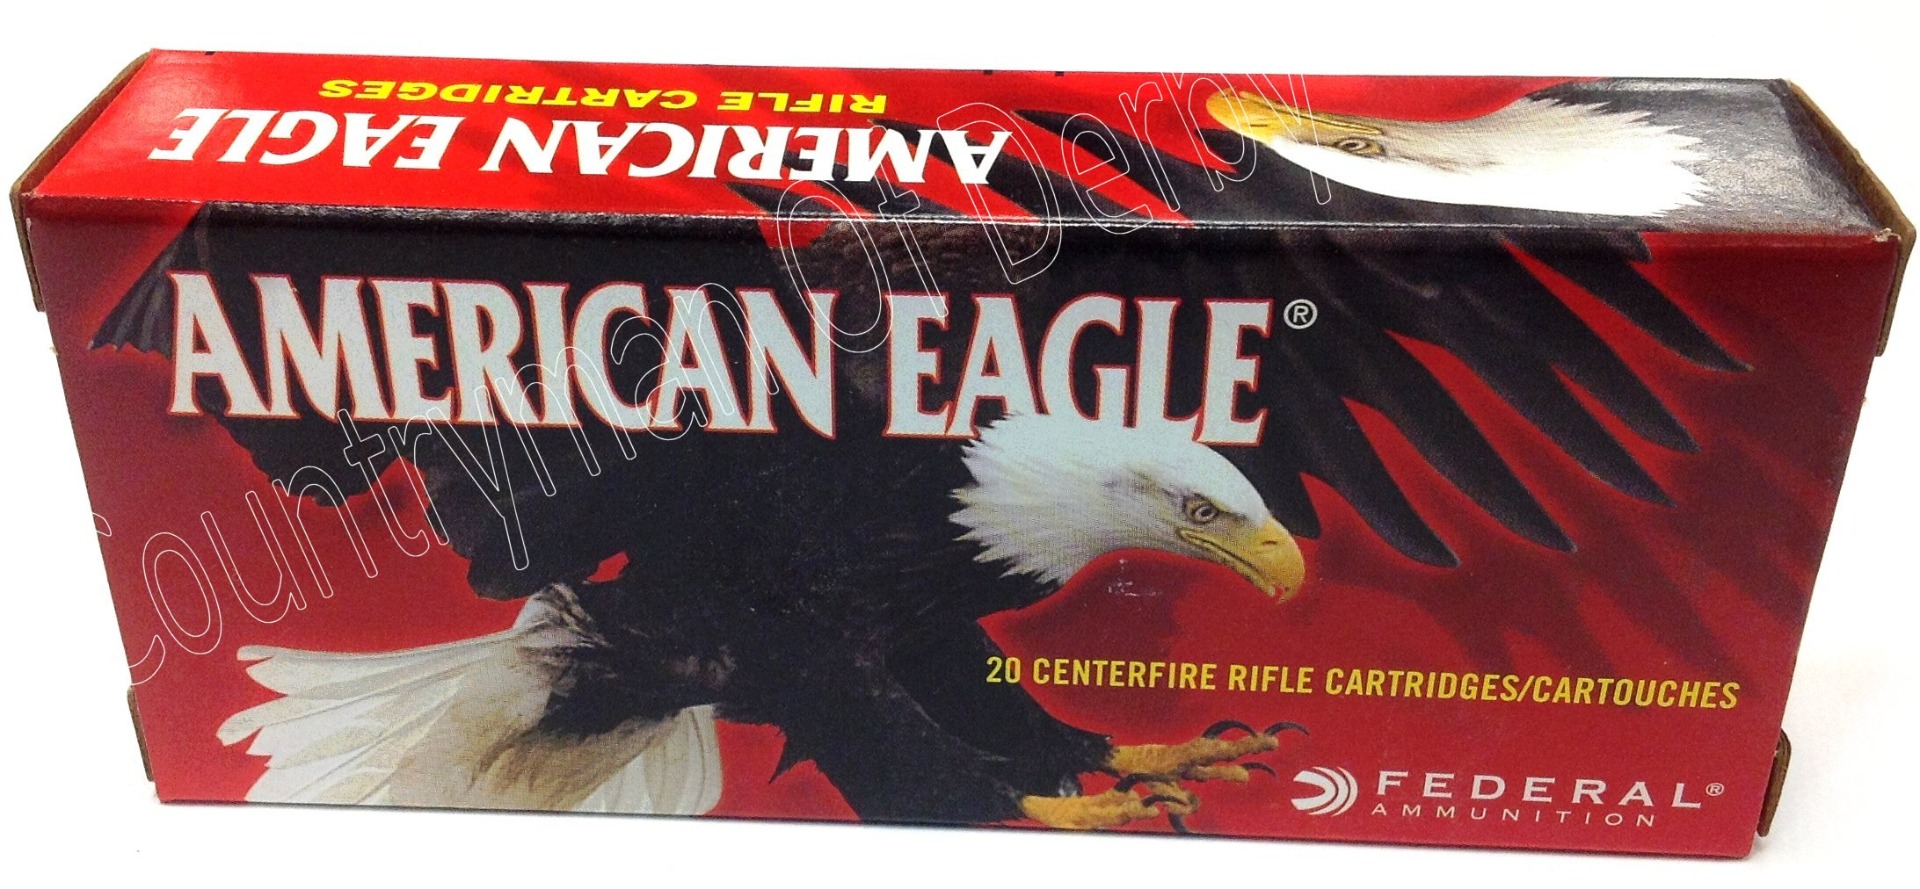 Federal American Eagle .223 50gr JHP Jacketed Hollow Point Ammunition